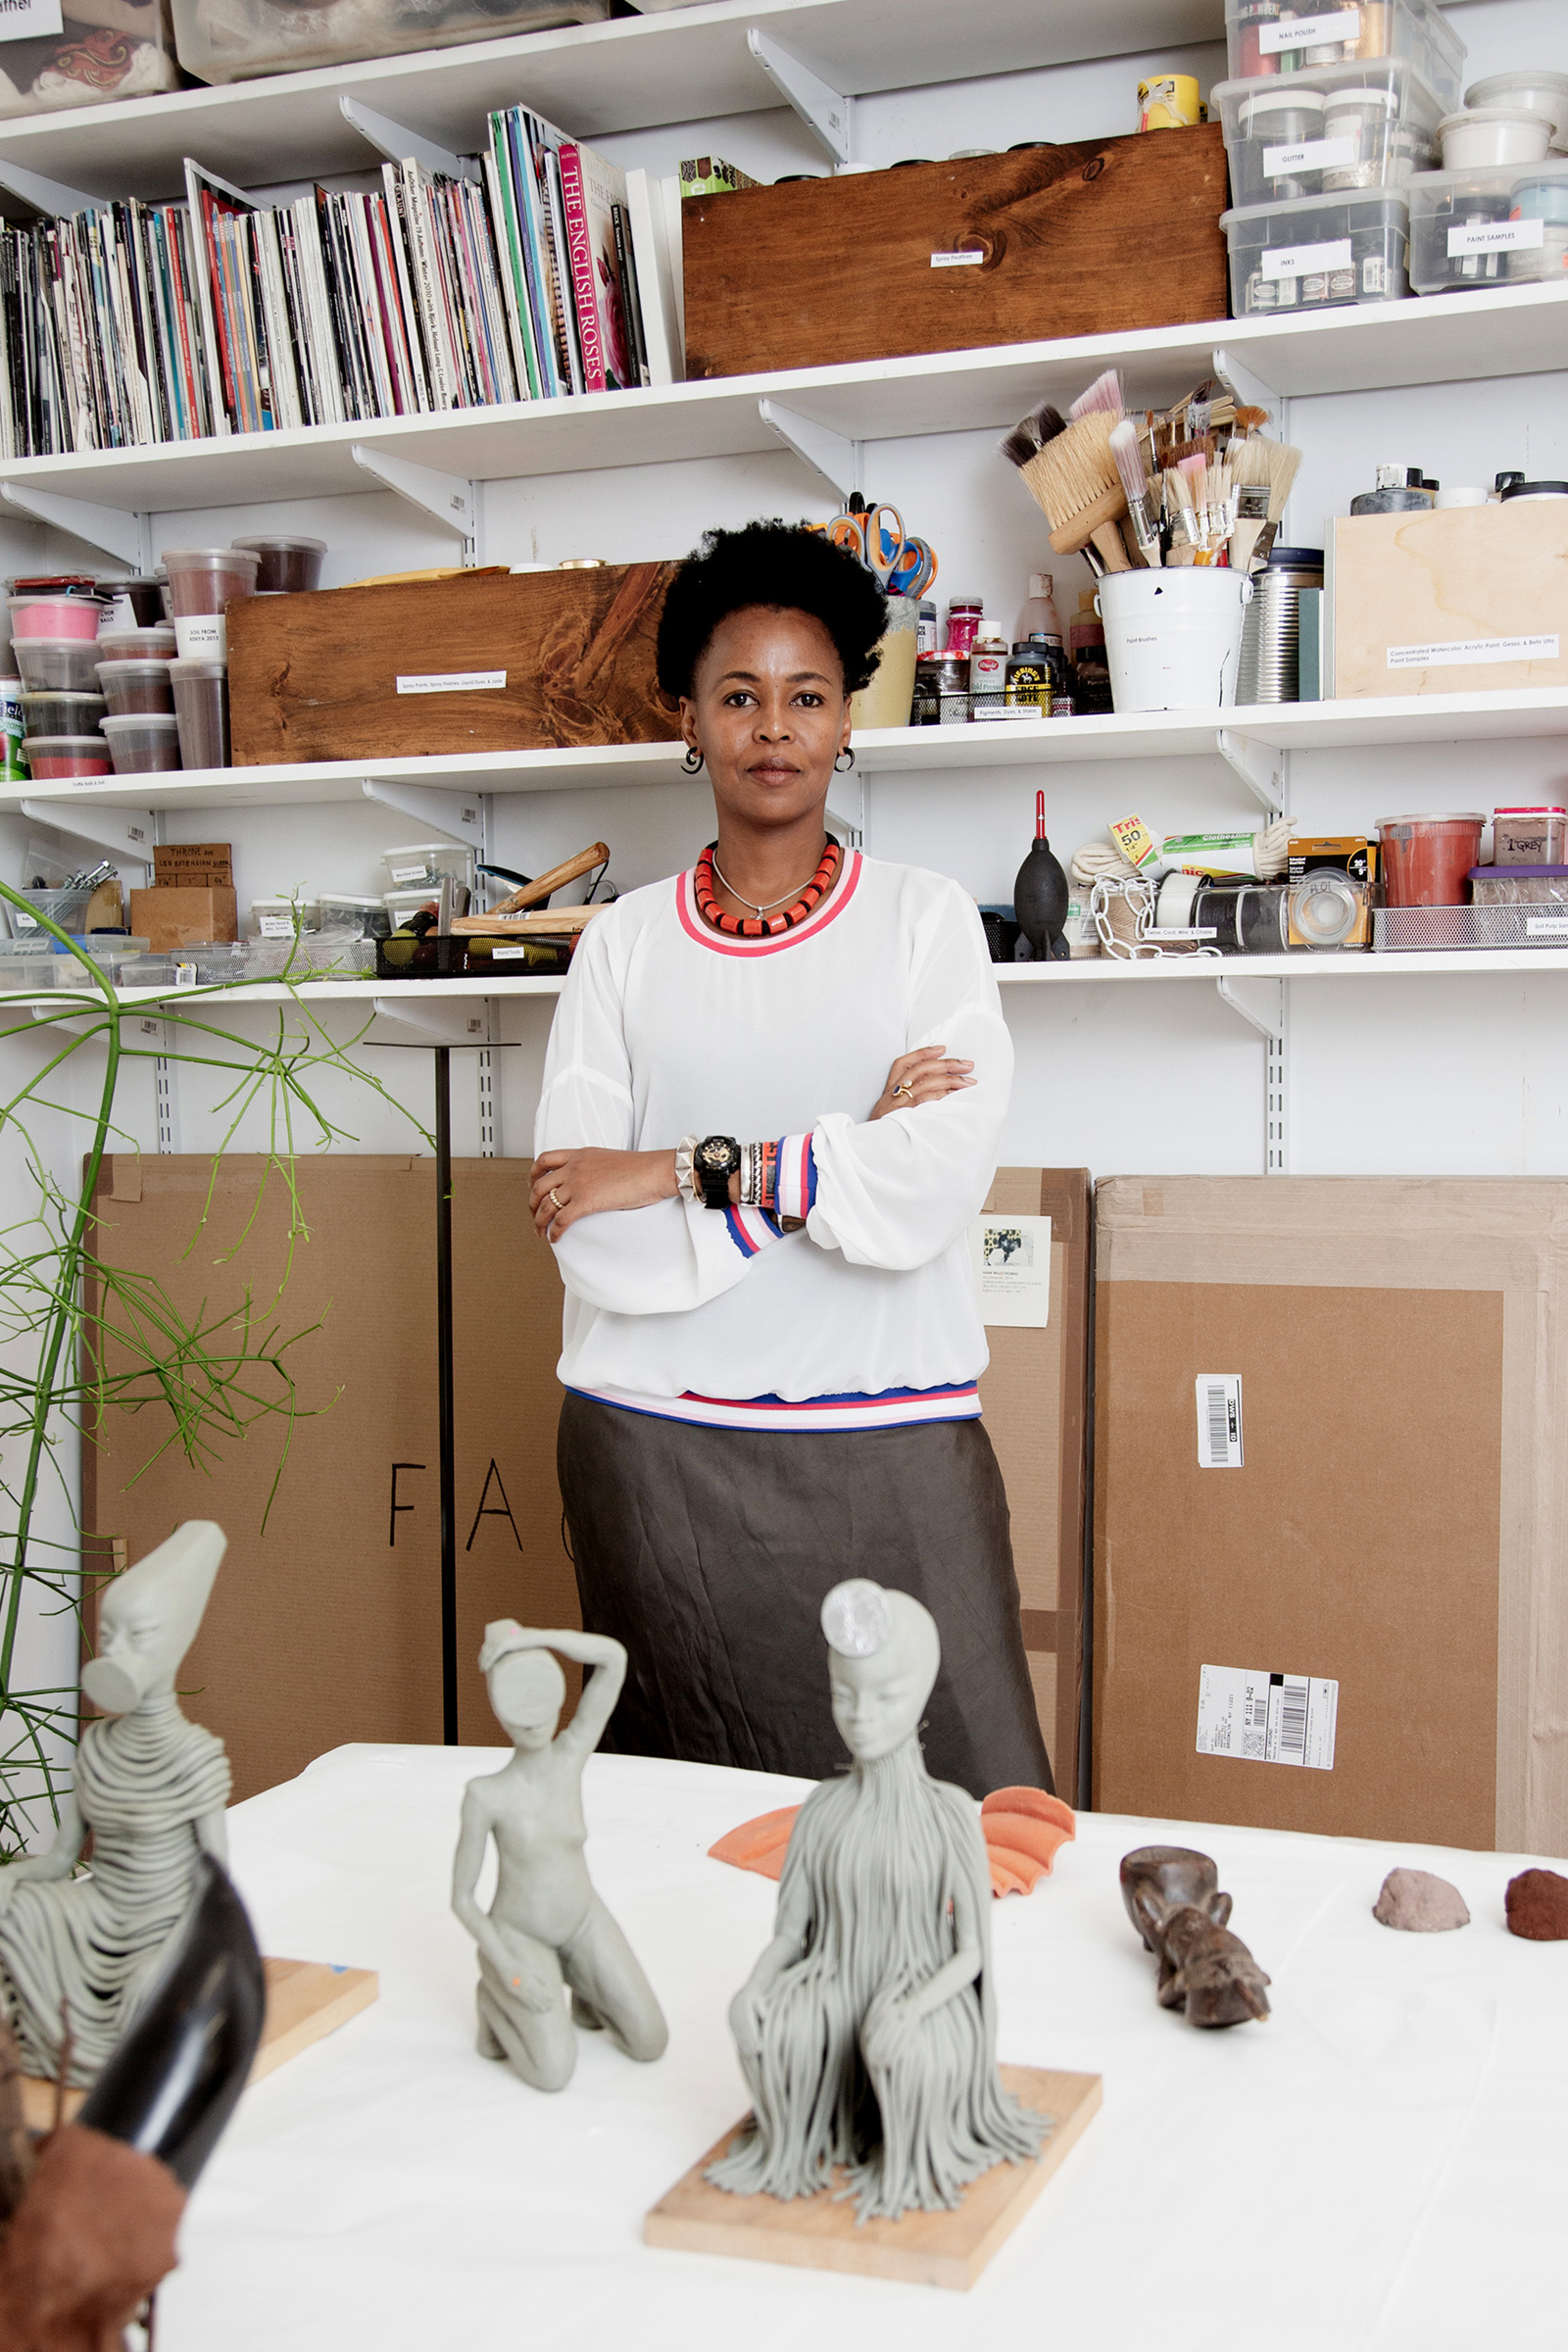 Artist Wangechi Mutu in her Brooklyn studio with models for her sculptures that were installed outside the Metropolitan Museum of Art in New York, Sept. 26, 2019. (Sunny Shokrae—The New York Times/Redux)